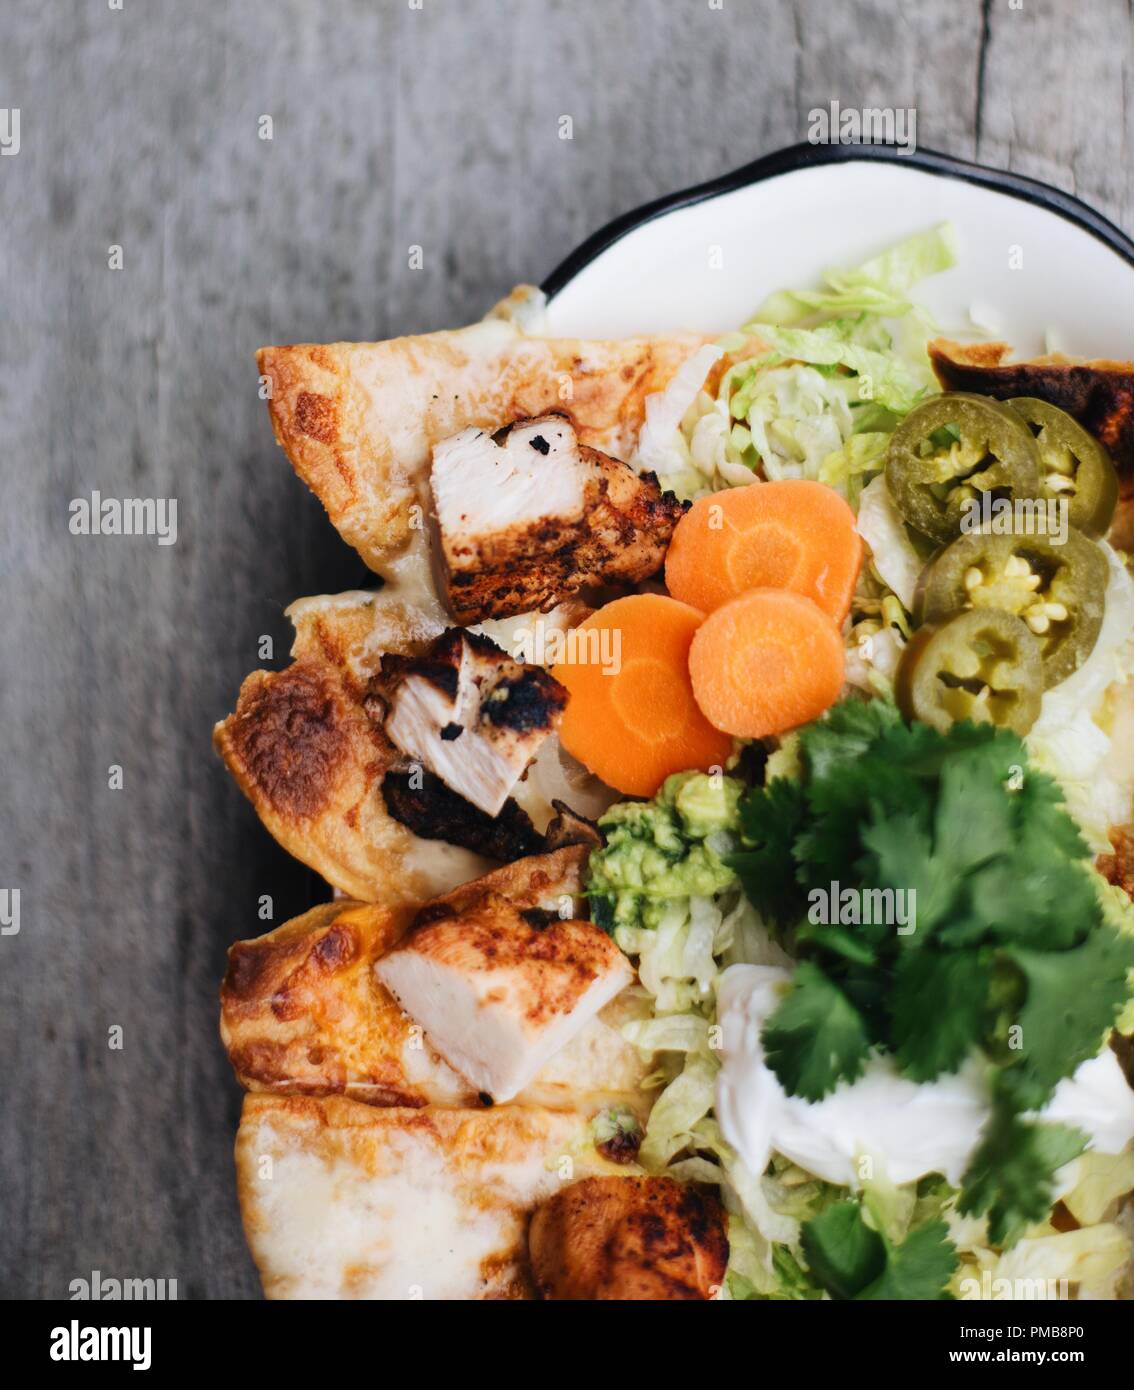 Tex-Mex meets fine dining with traditional texmex dishes including tamales, mole, quesadillas, and nachos on rustic tabletop with fresh toppings. Stock Photo